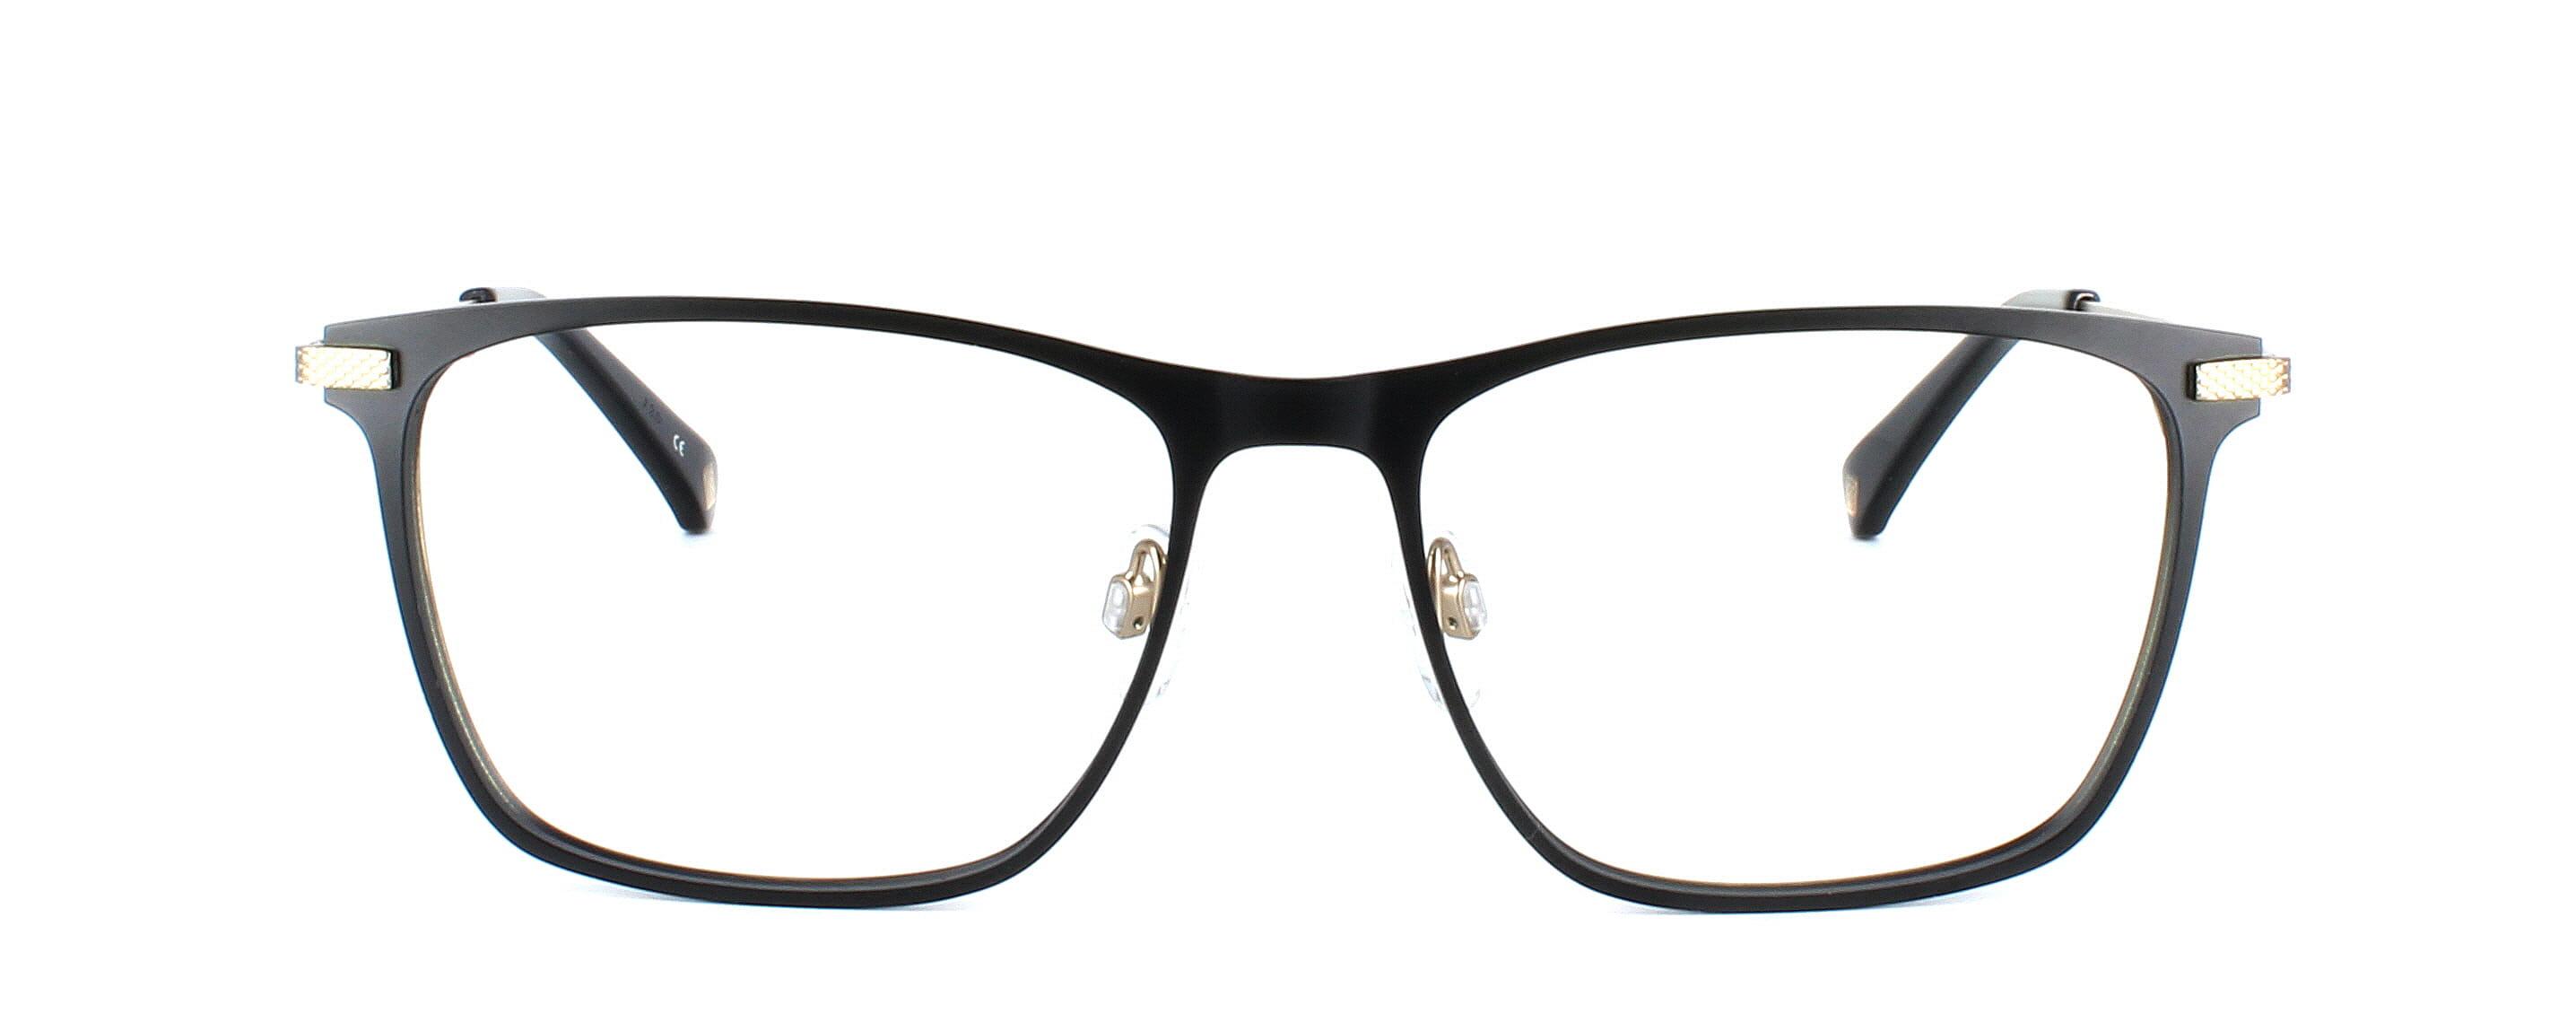 Ted Baker 4276 in black and gold. This is a metal unisex designer frame - image view 5